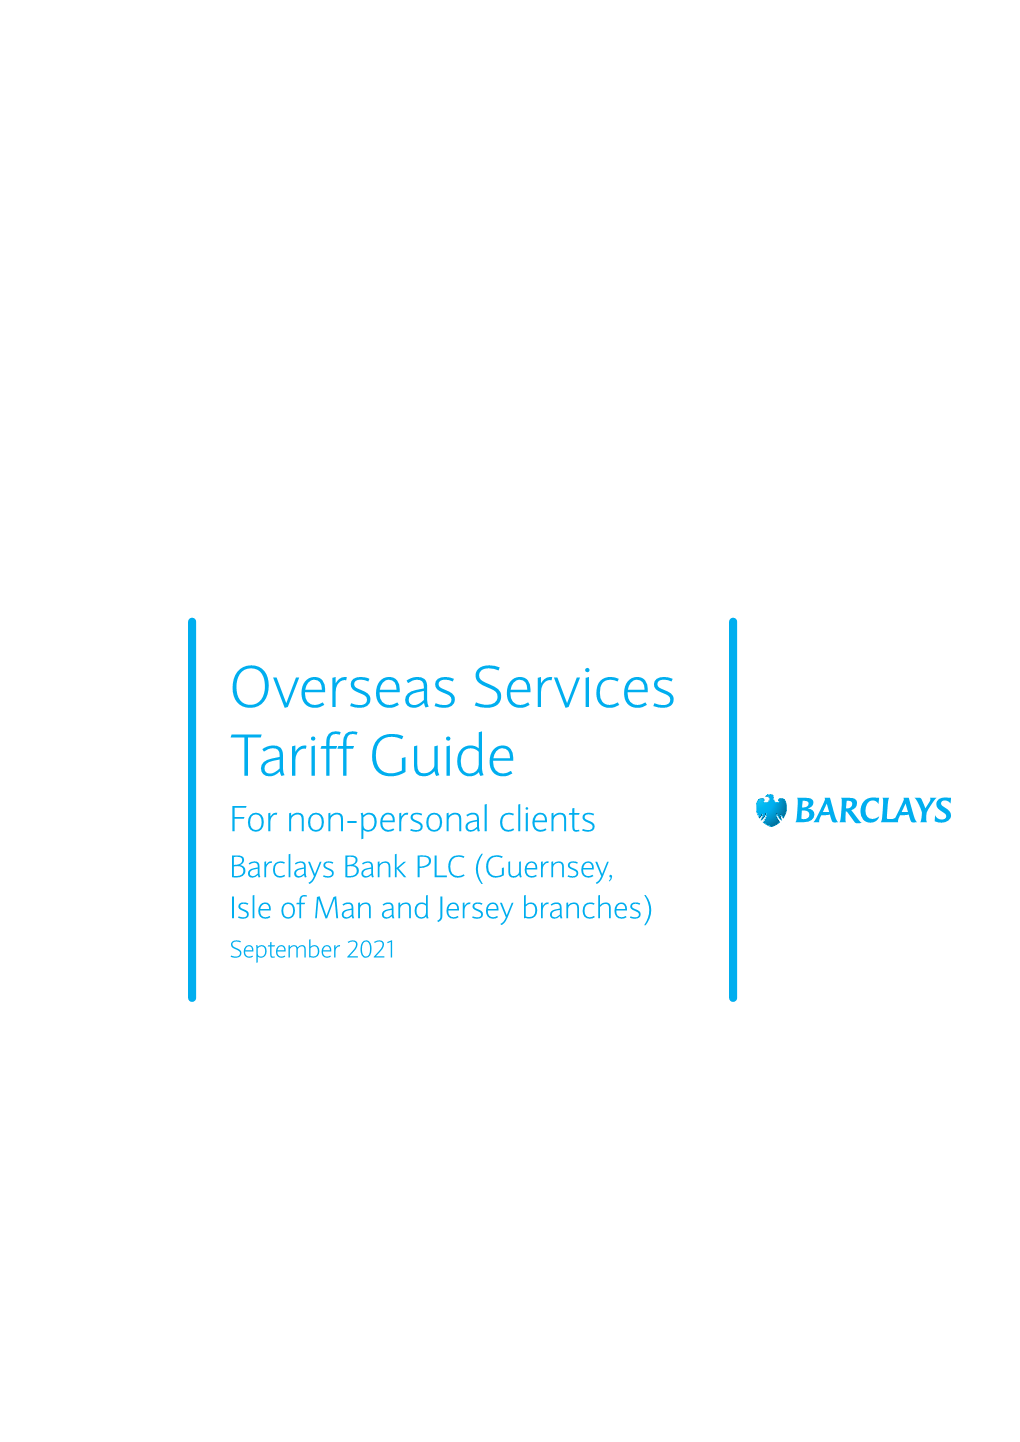 Overseas Services Tariff Guide for Non-Personal Clients Barclays Bank PLC (Guernsey, Isle of Man and Jersey Branches) September 2021